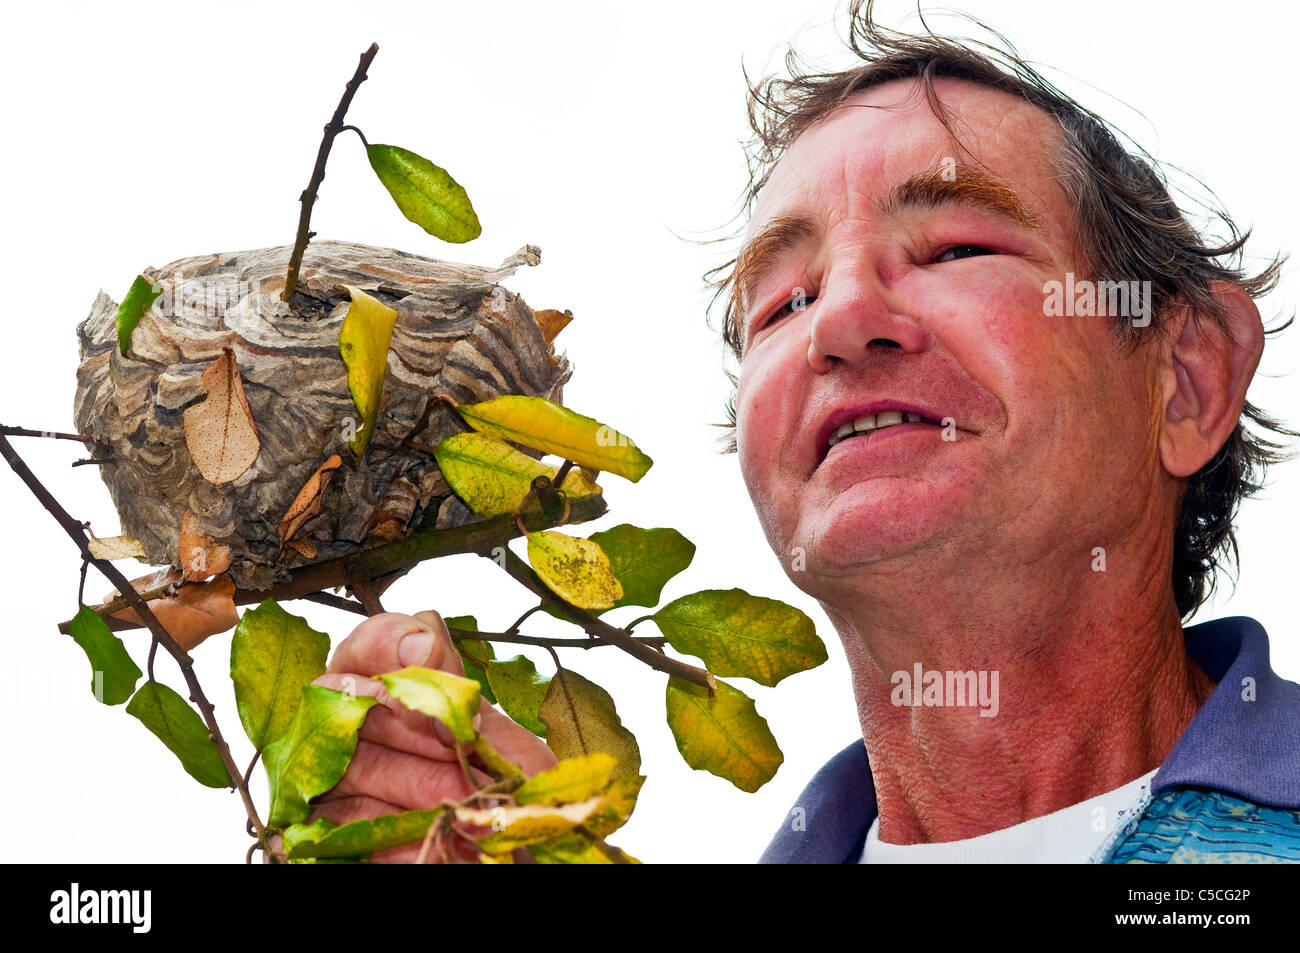 Man with wasp stings / swollen face holding wasp's nest - France. Stock Photo